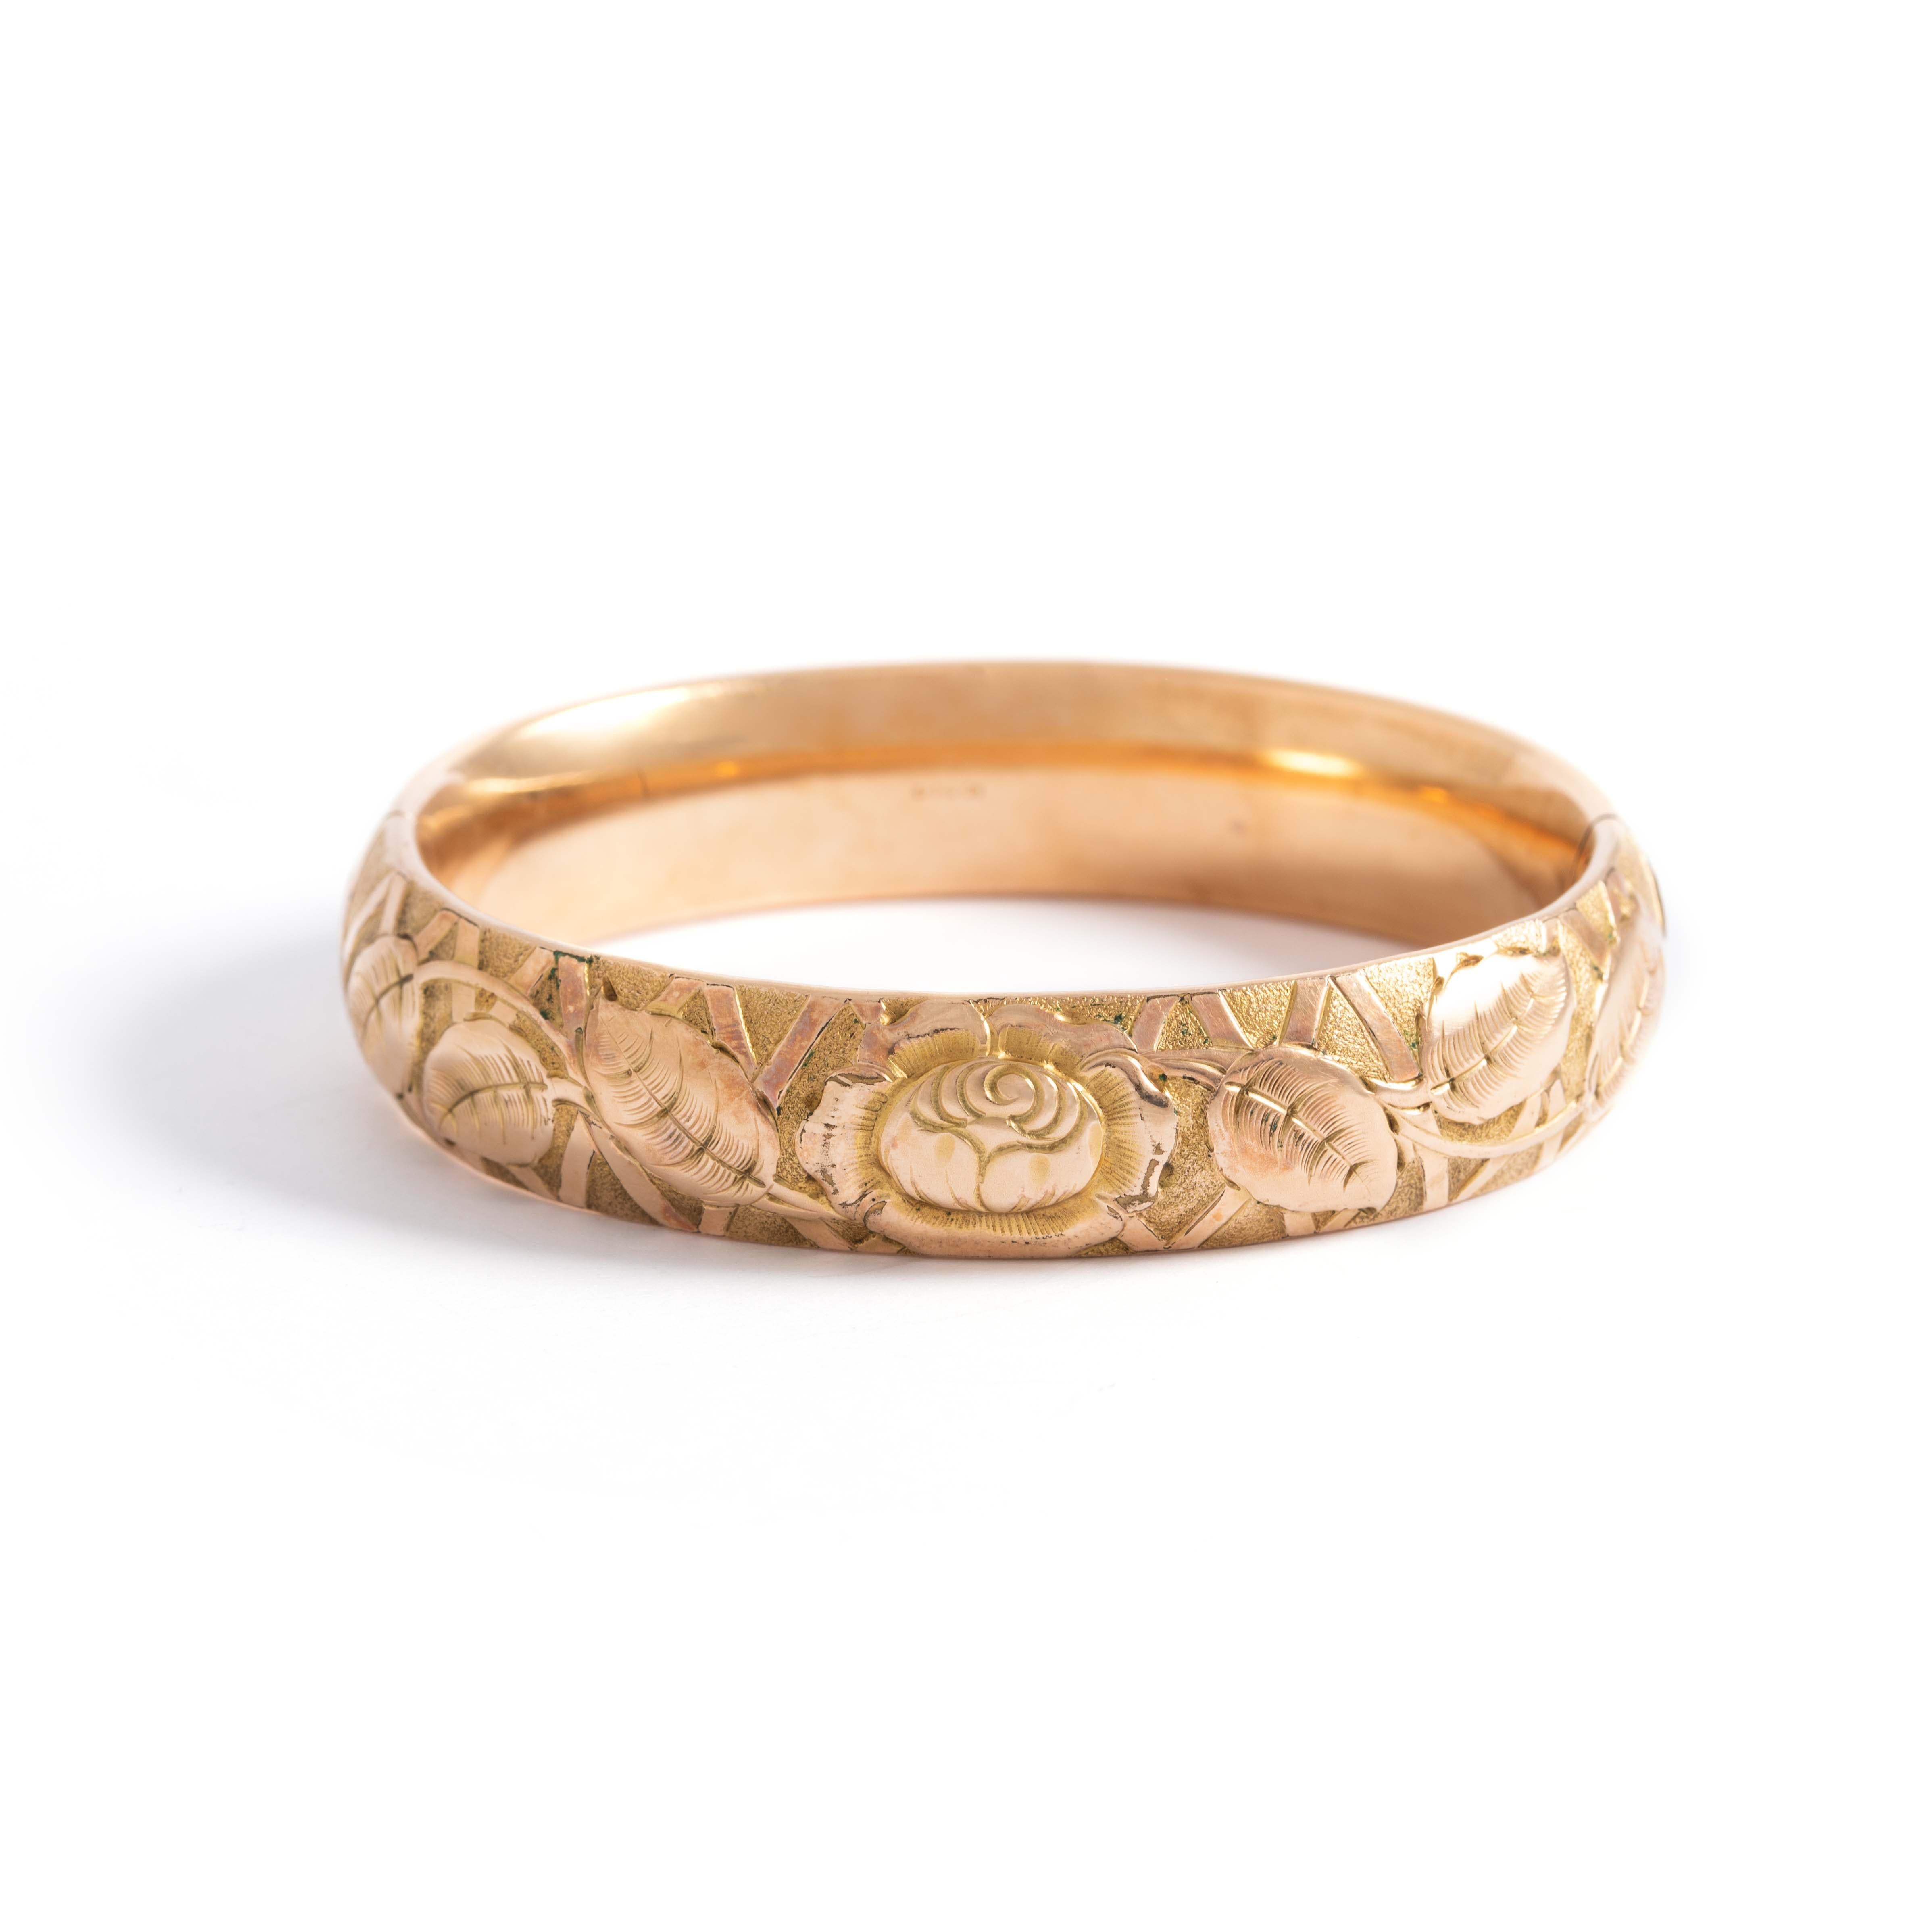 9K gold bangle with flower and foliage decorations. Antique.
Circumference: 18.69 centimeters. 
Total weight: 25.84 grams.